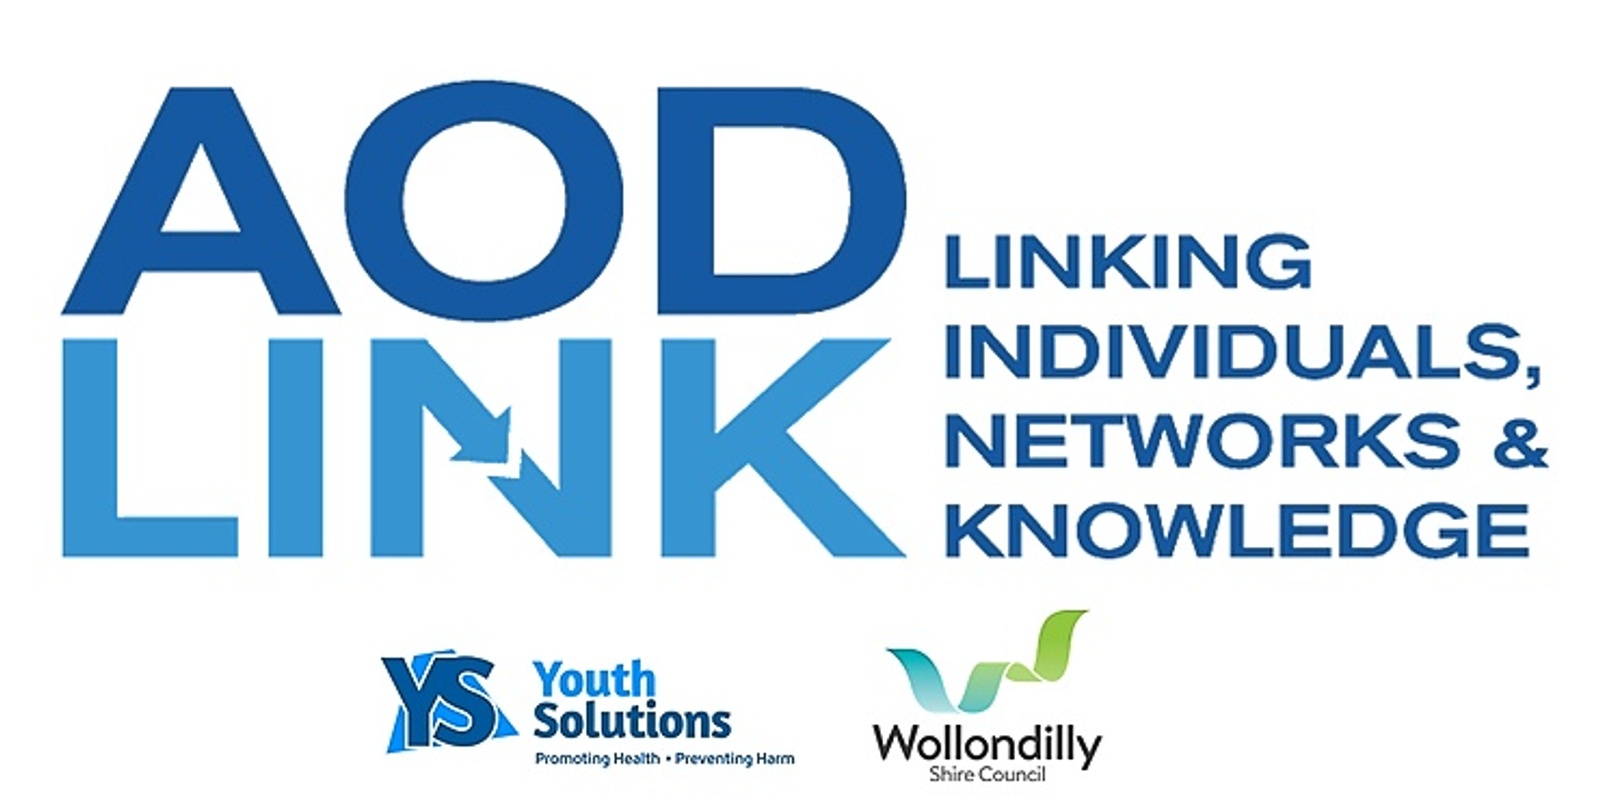 Banner image for Youth Solutions & Wollondilly Shire Council - AOD Link Presentation 'Exploring Vaping'